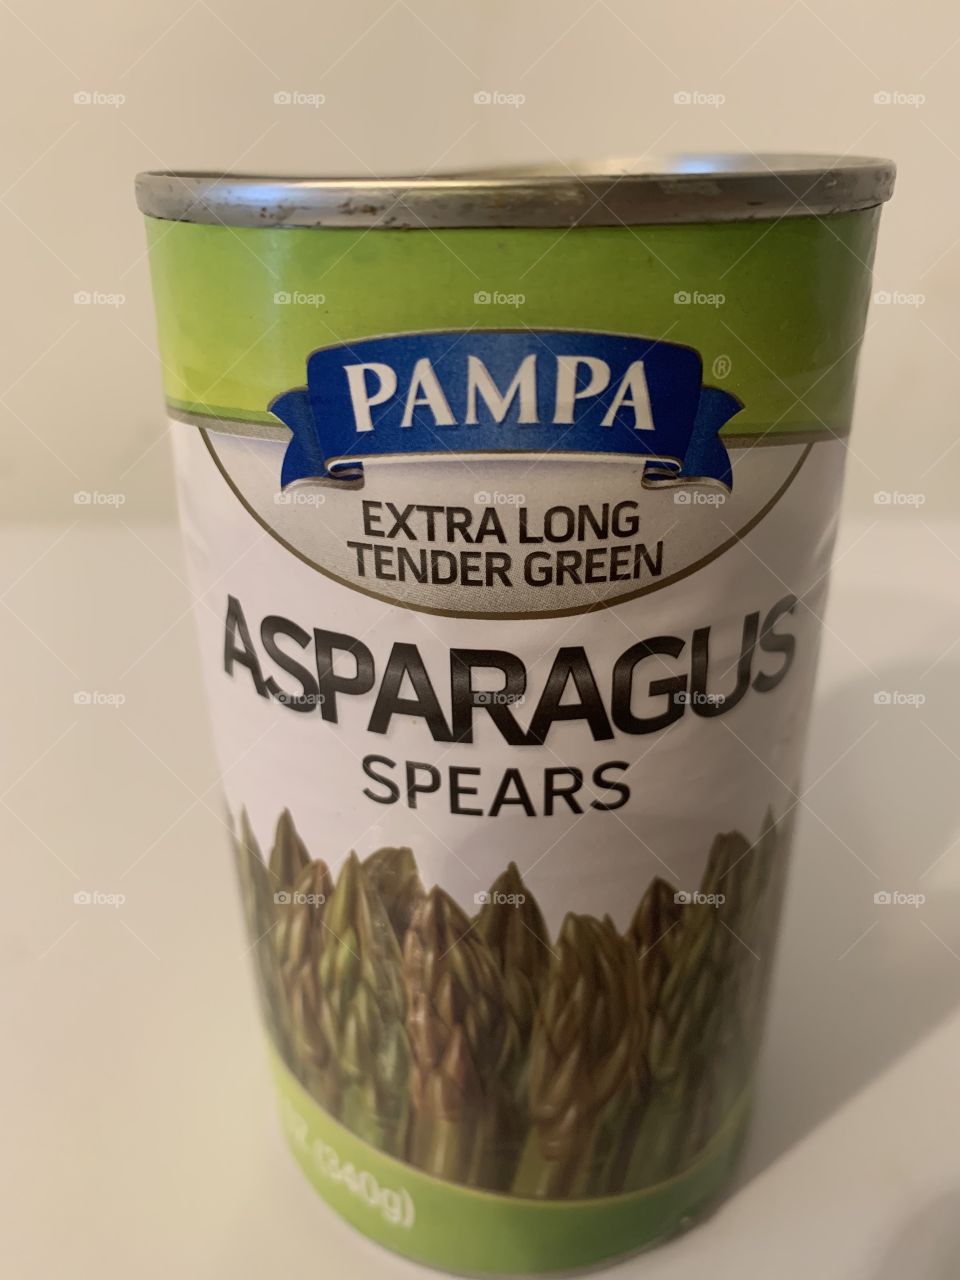 I LOVE PAMPA ASPARAGUS FOR US! 